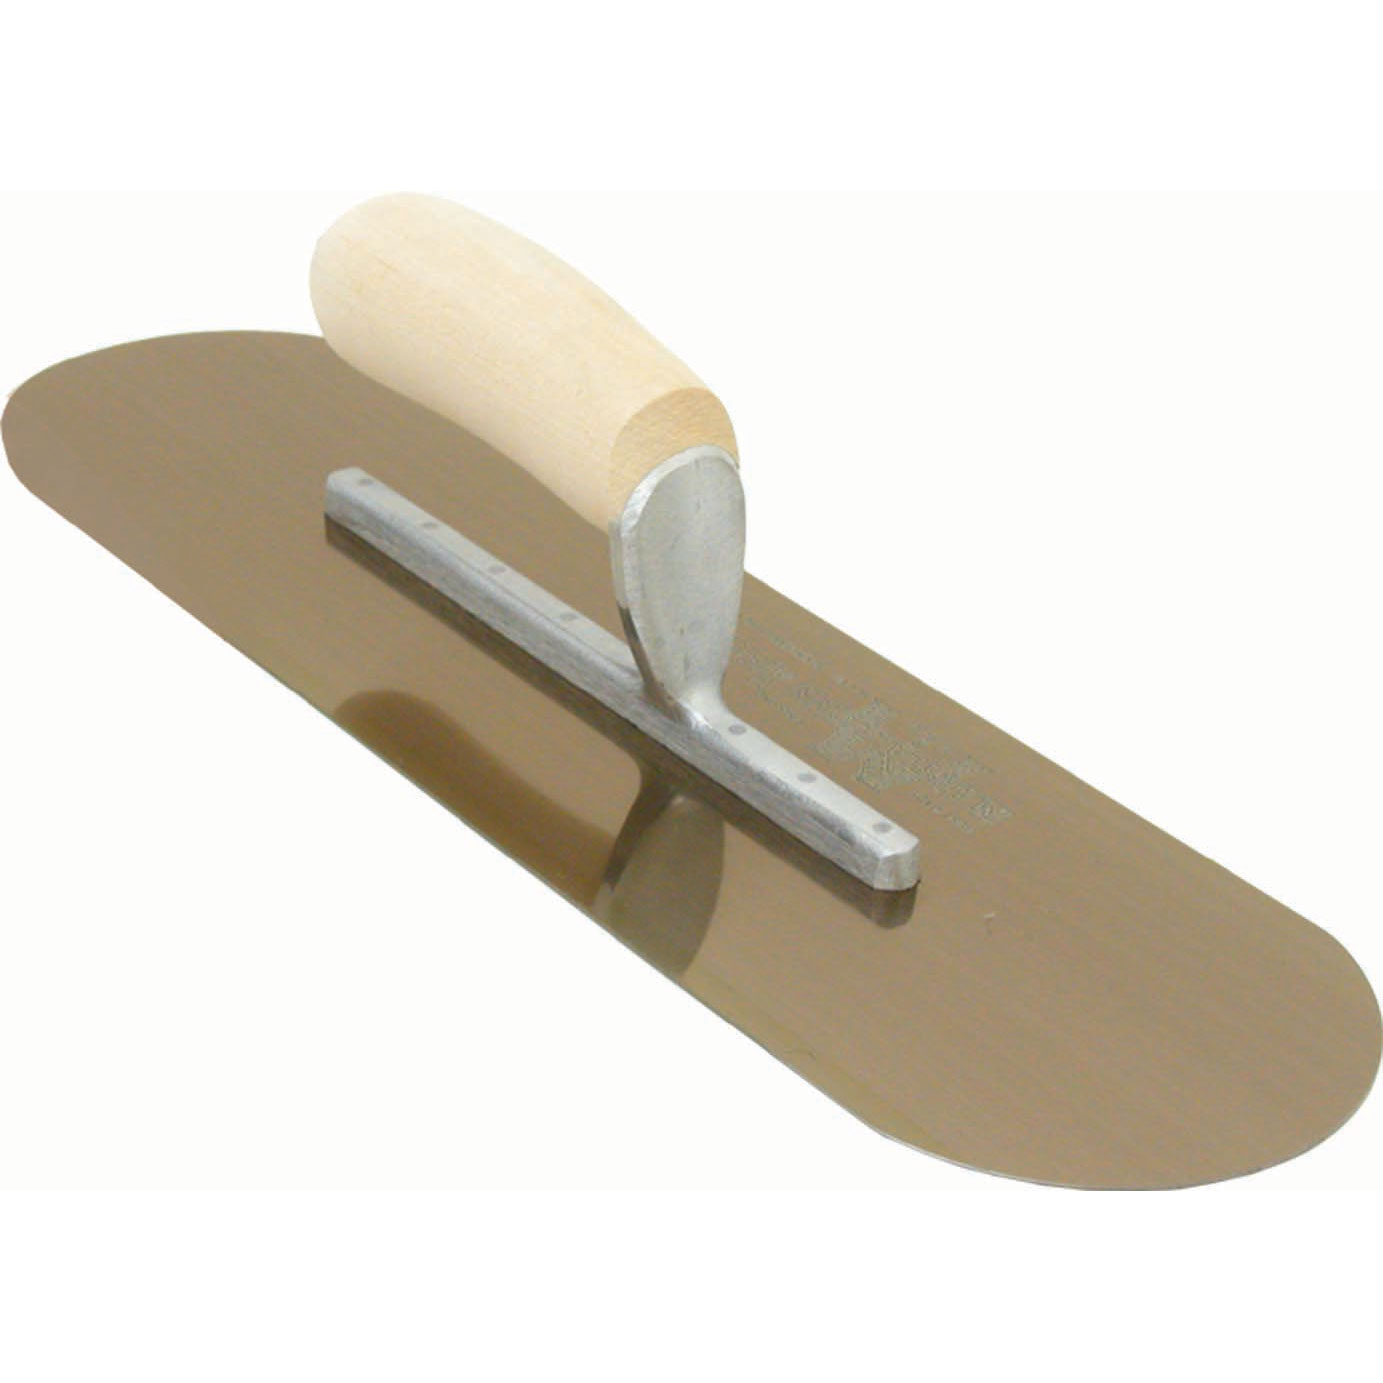 Marshalltown SP164GS 16in x 4in Golden Stainless Steel Pool Trowel with Wood Handle SP164GS